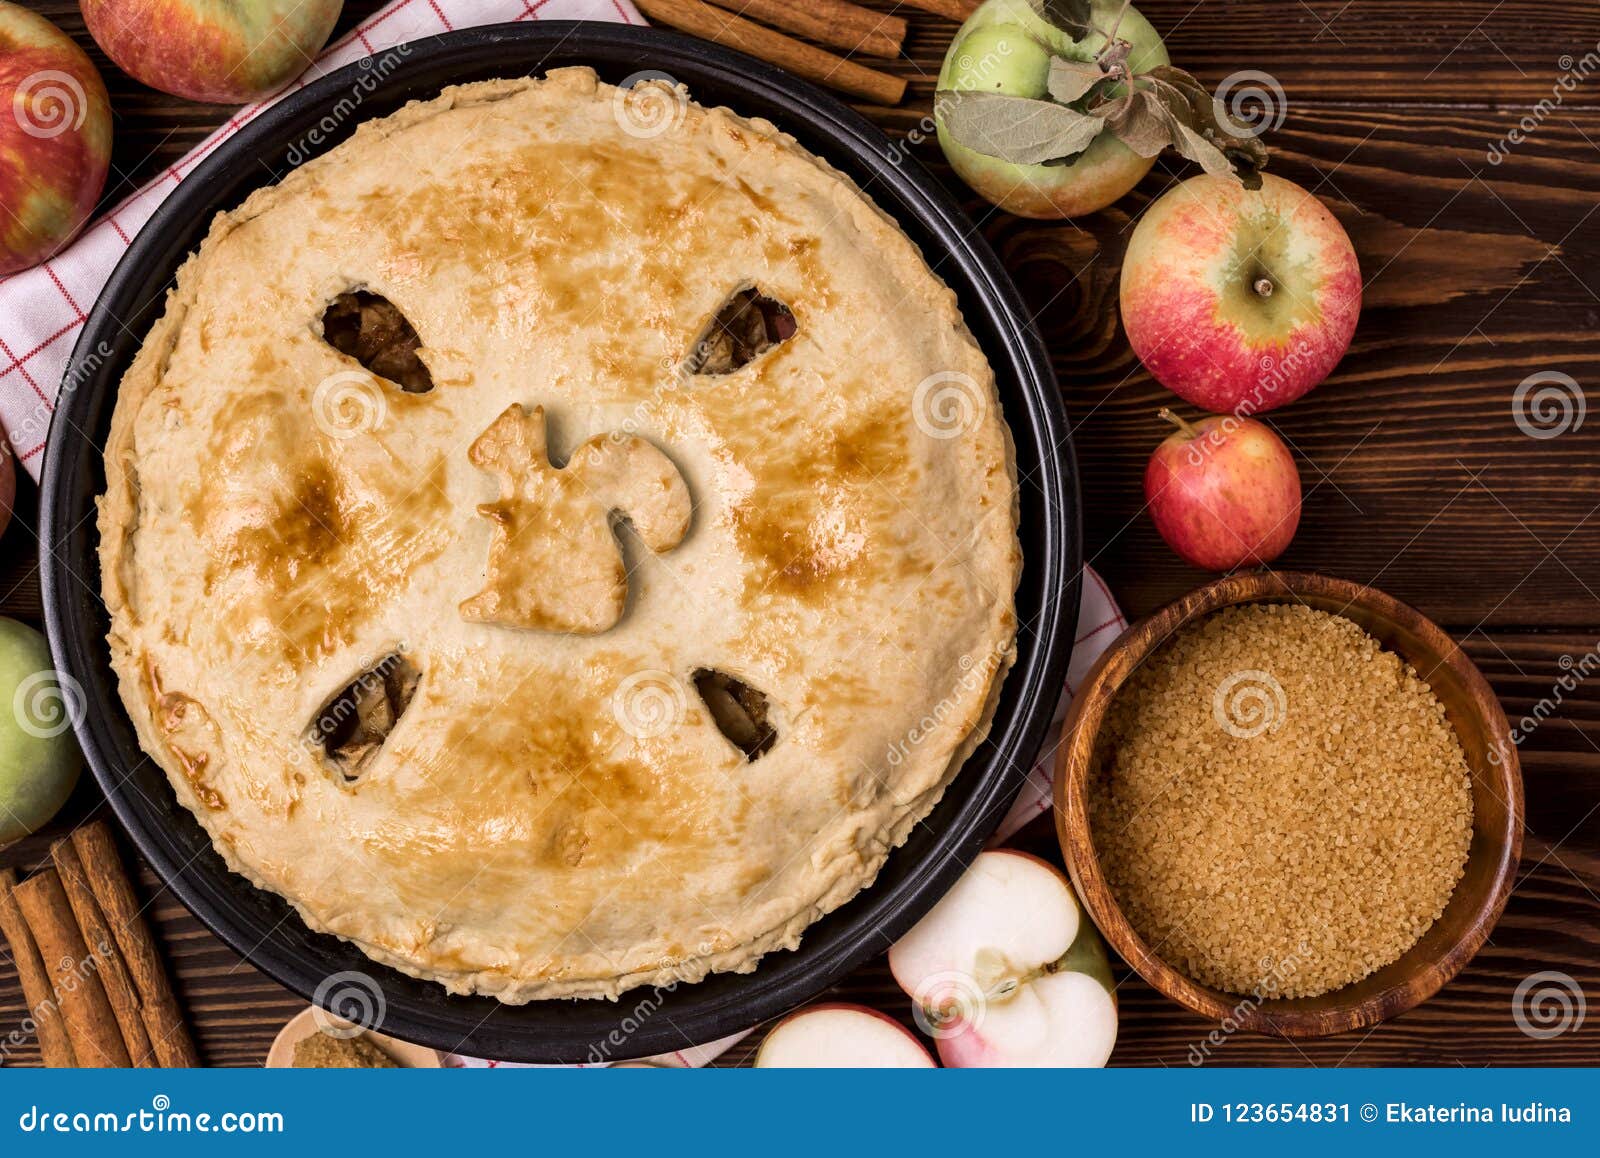 homemade tasty apple pie with apples and spices wooden background top view raw apples cinnamone sticks copy space